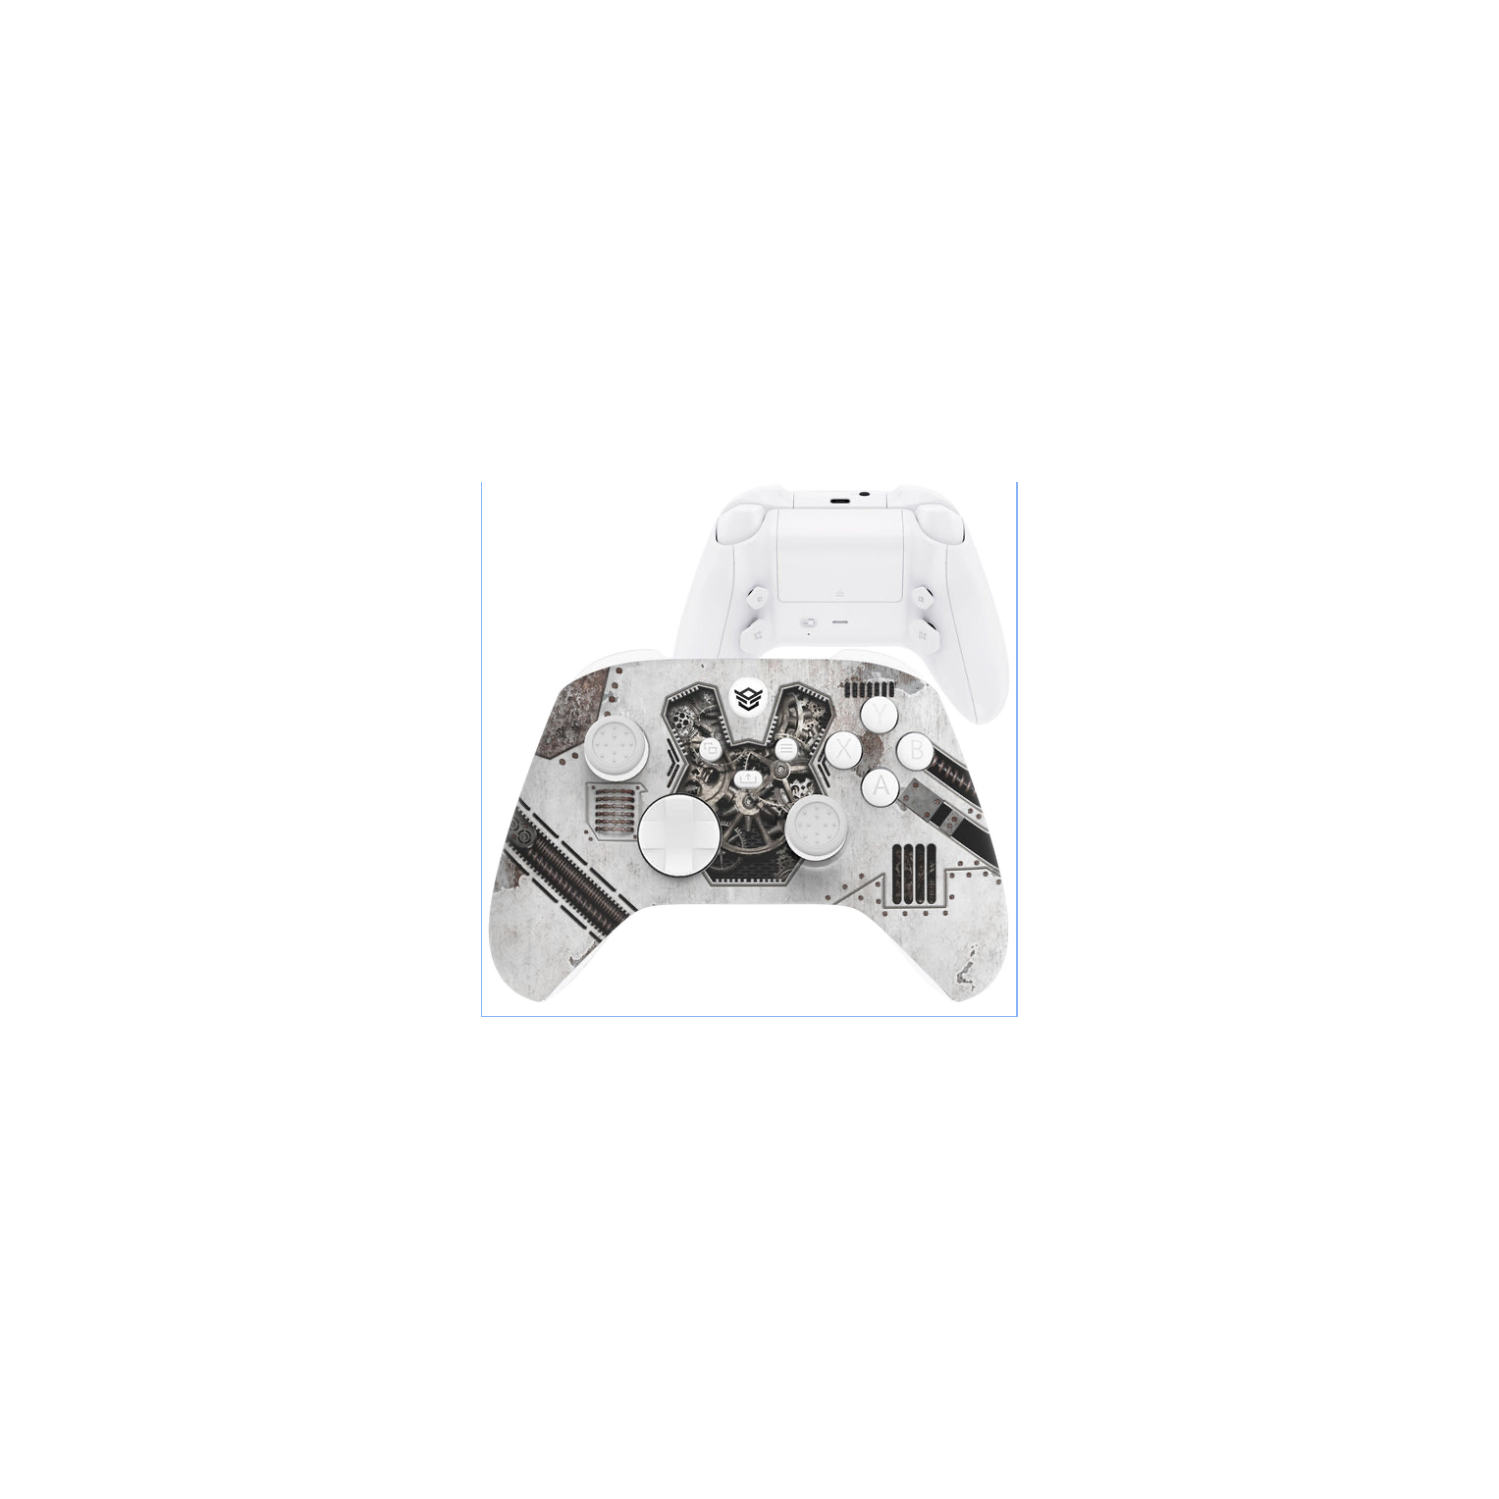 "White Pro" Smart Rapid Fire Custom Modded Controller Compatible with Xbox One S/X MASTER MOD for All Major Shooter Games